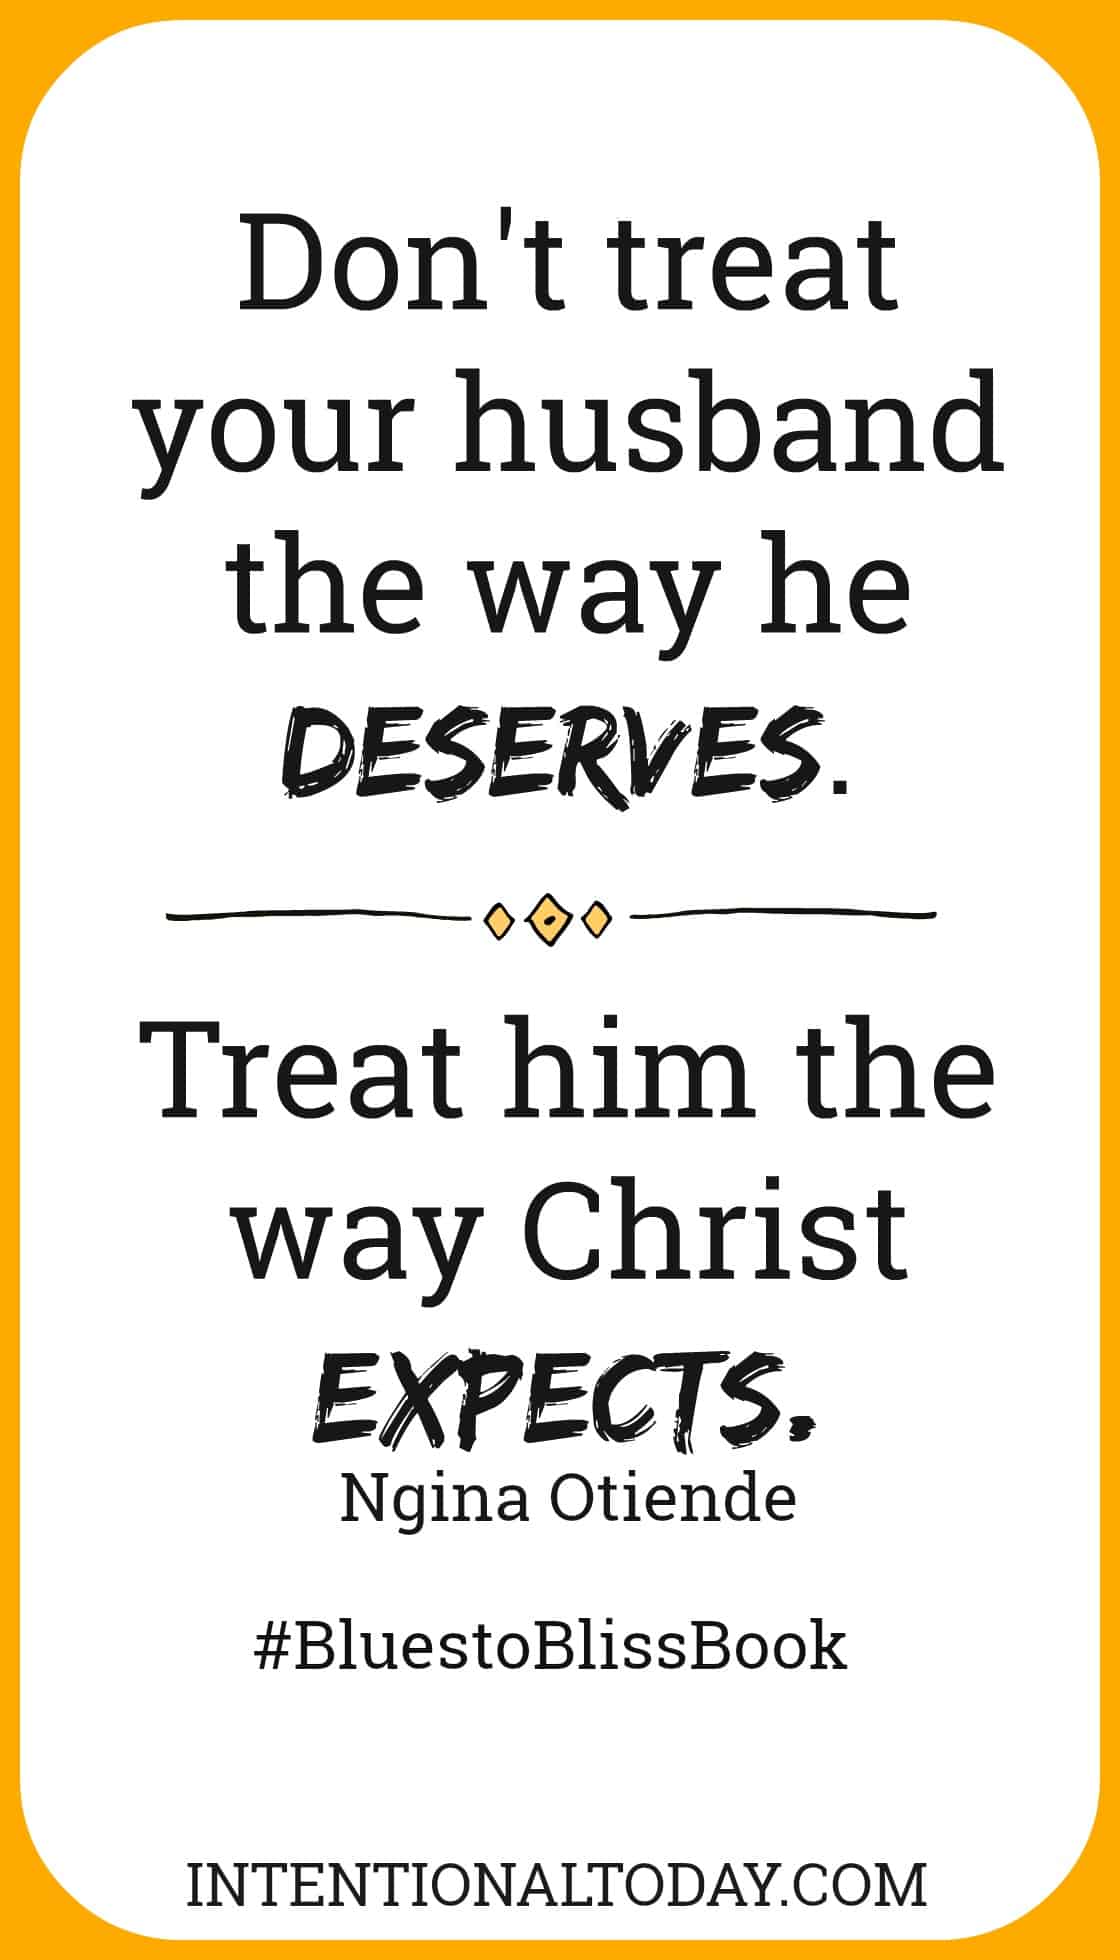 How to turn your marriage from blues to bliss - treat your husband the way Christ expects, not the way he deserves. Excerpt from the book